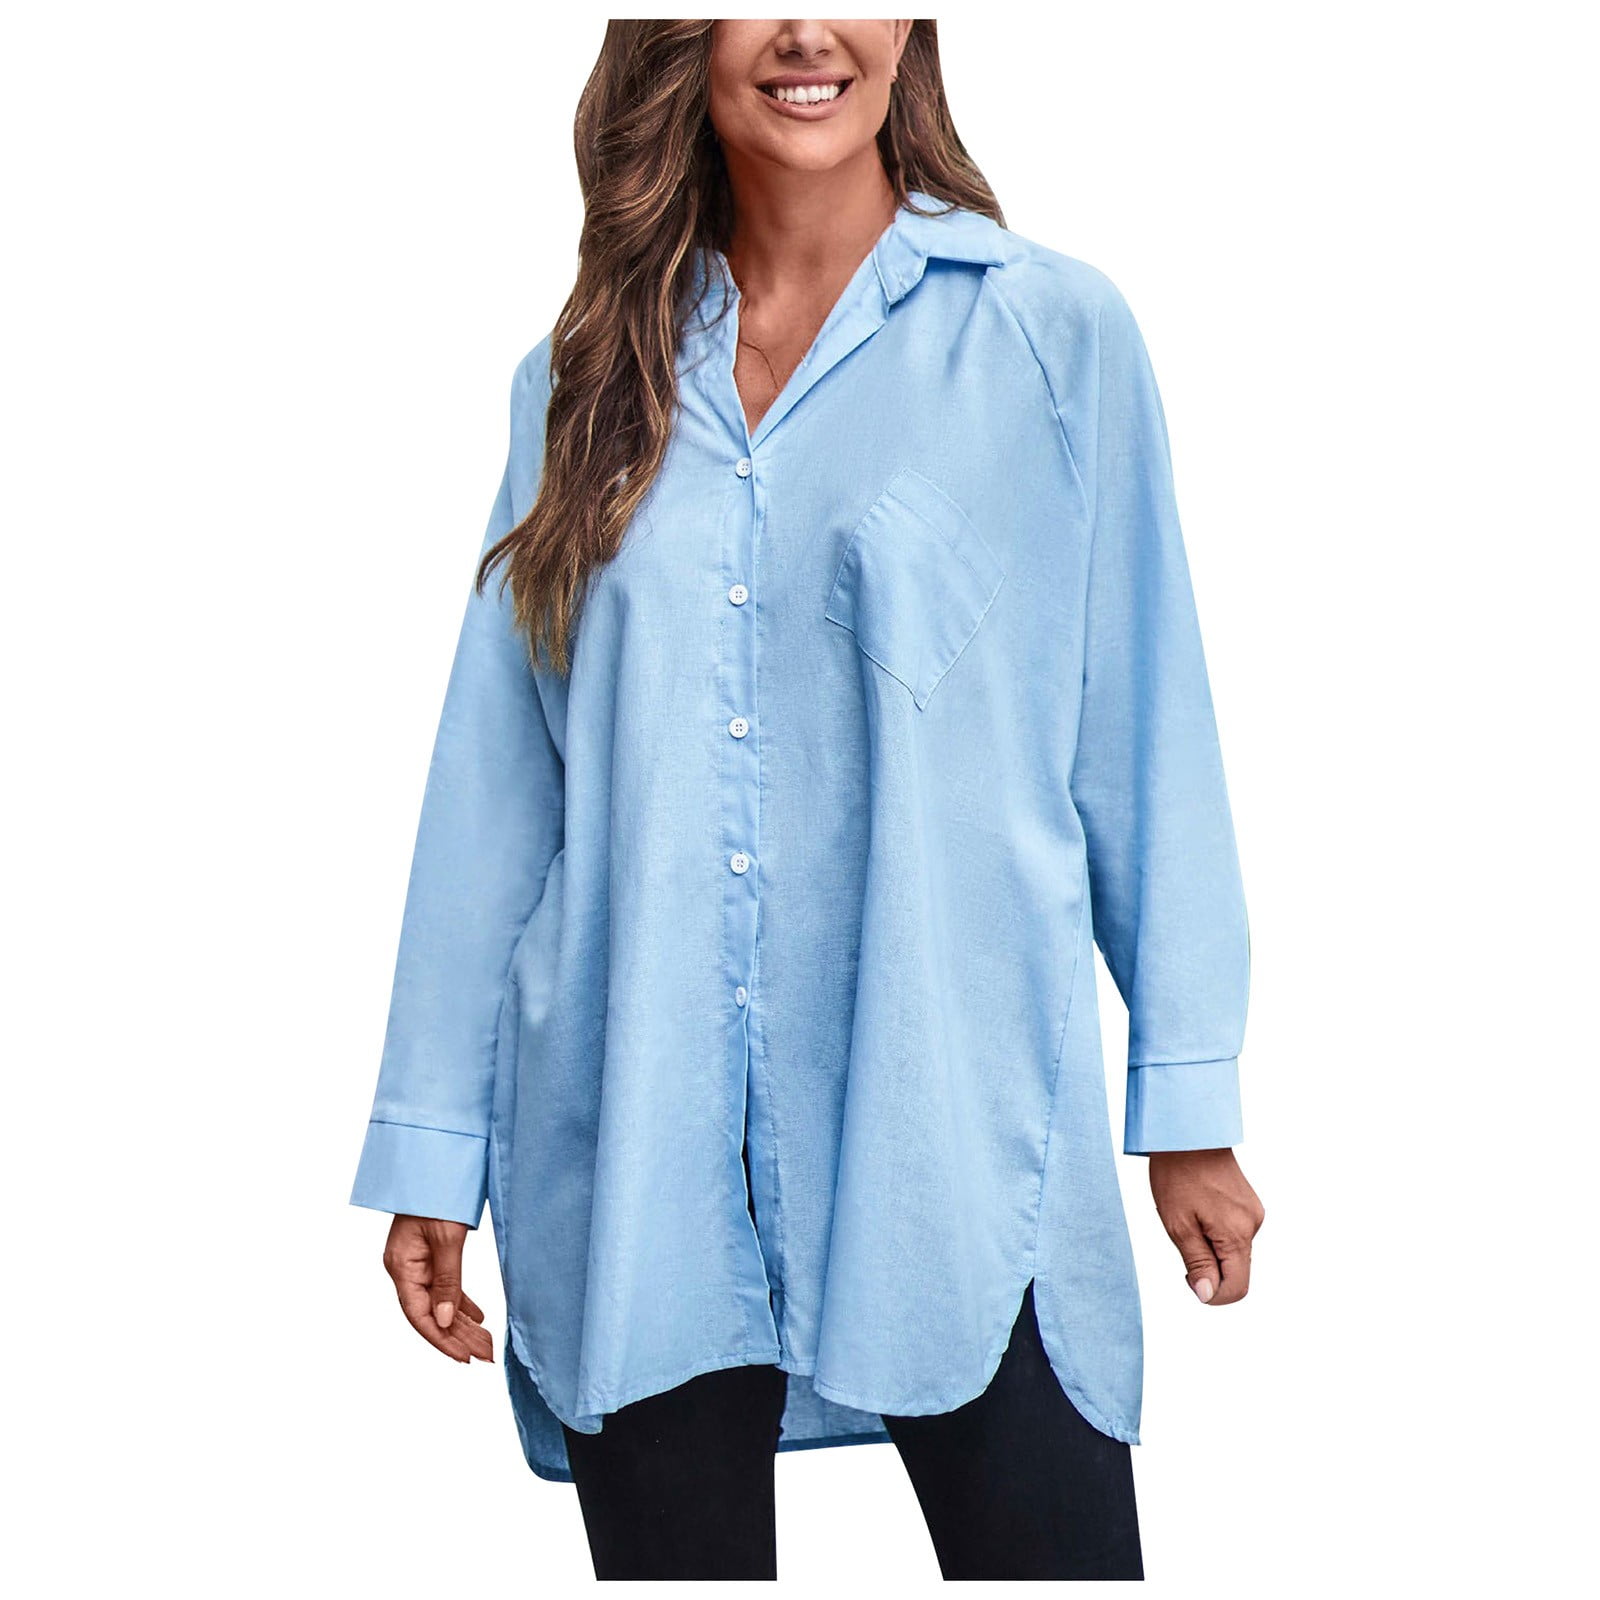 Shirts for Women Women Button Down Shirts With Pockets Long Sleeve